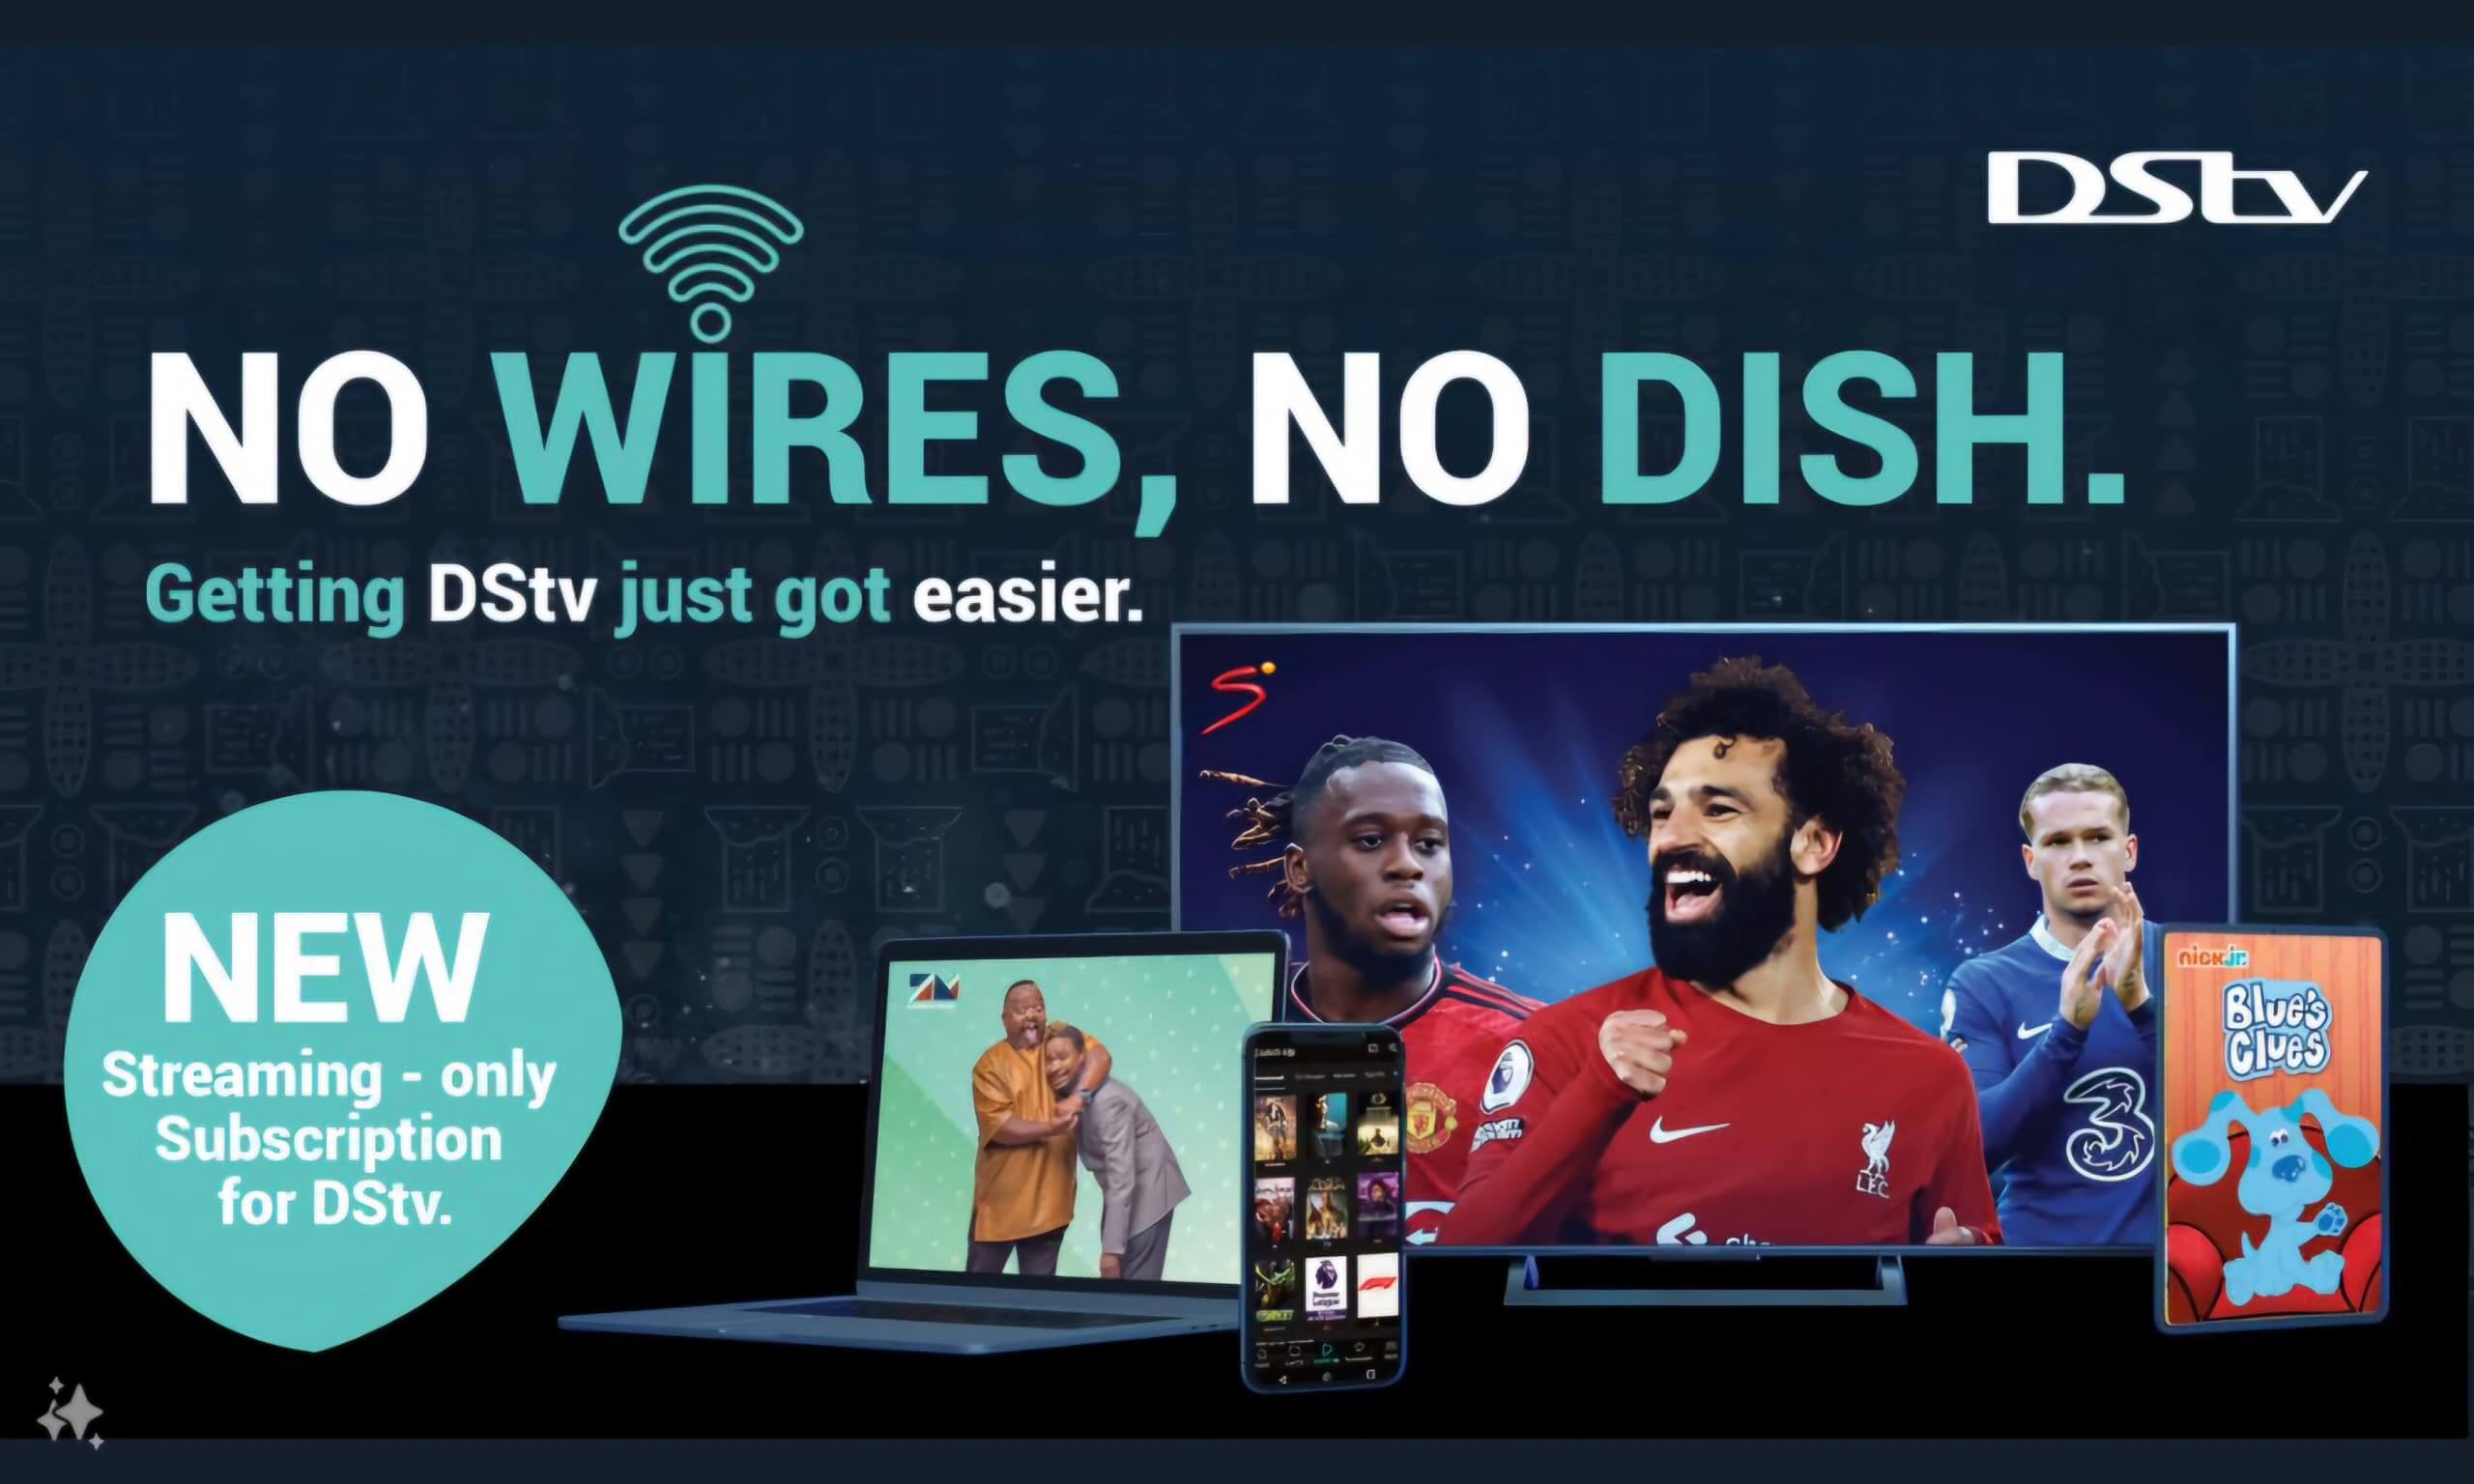 Dishless DStv: Bringing great content directly to your screens anytime, anywhere